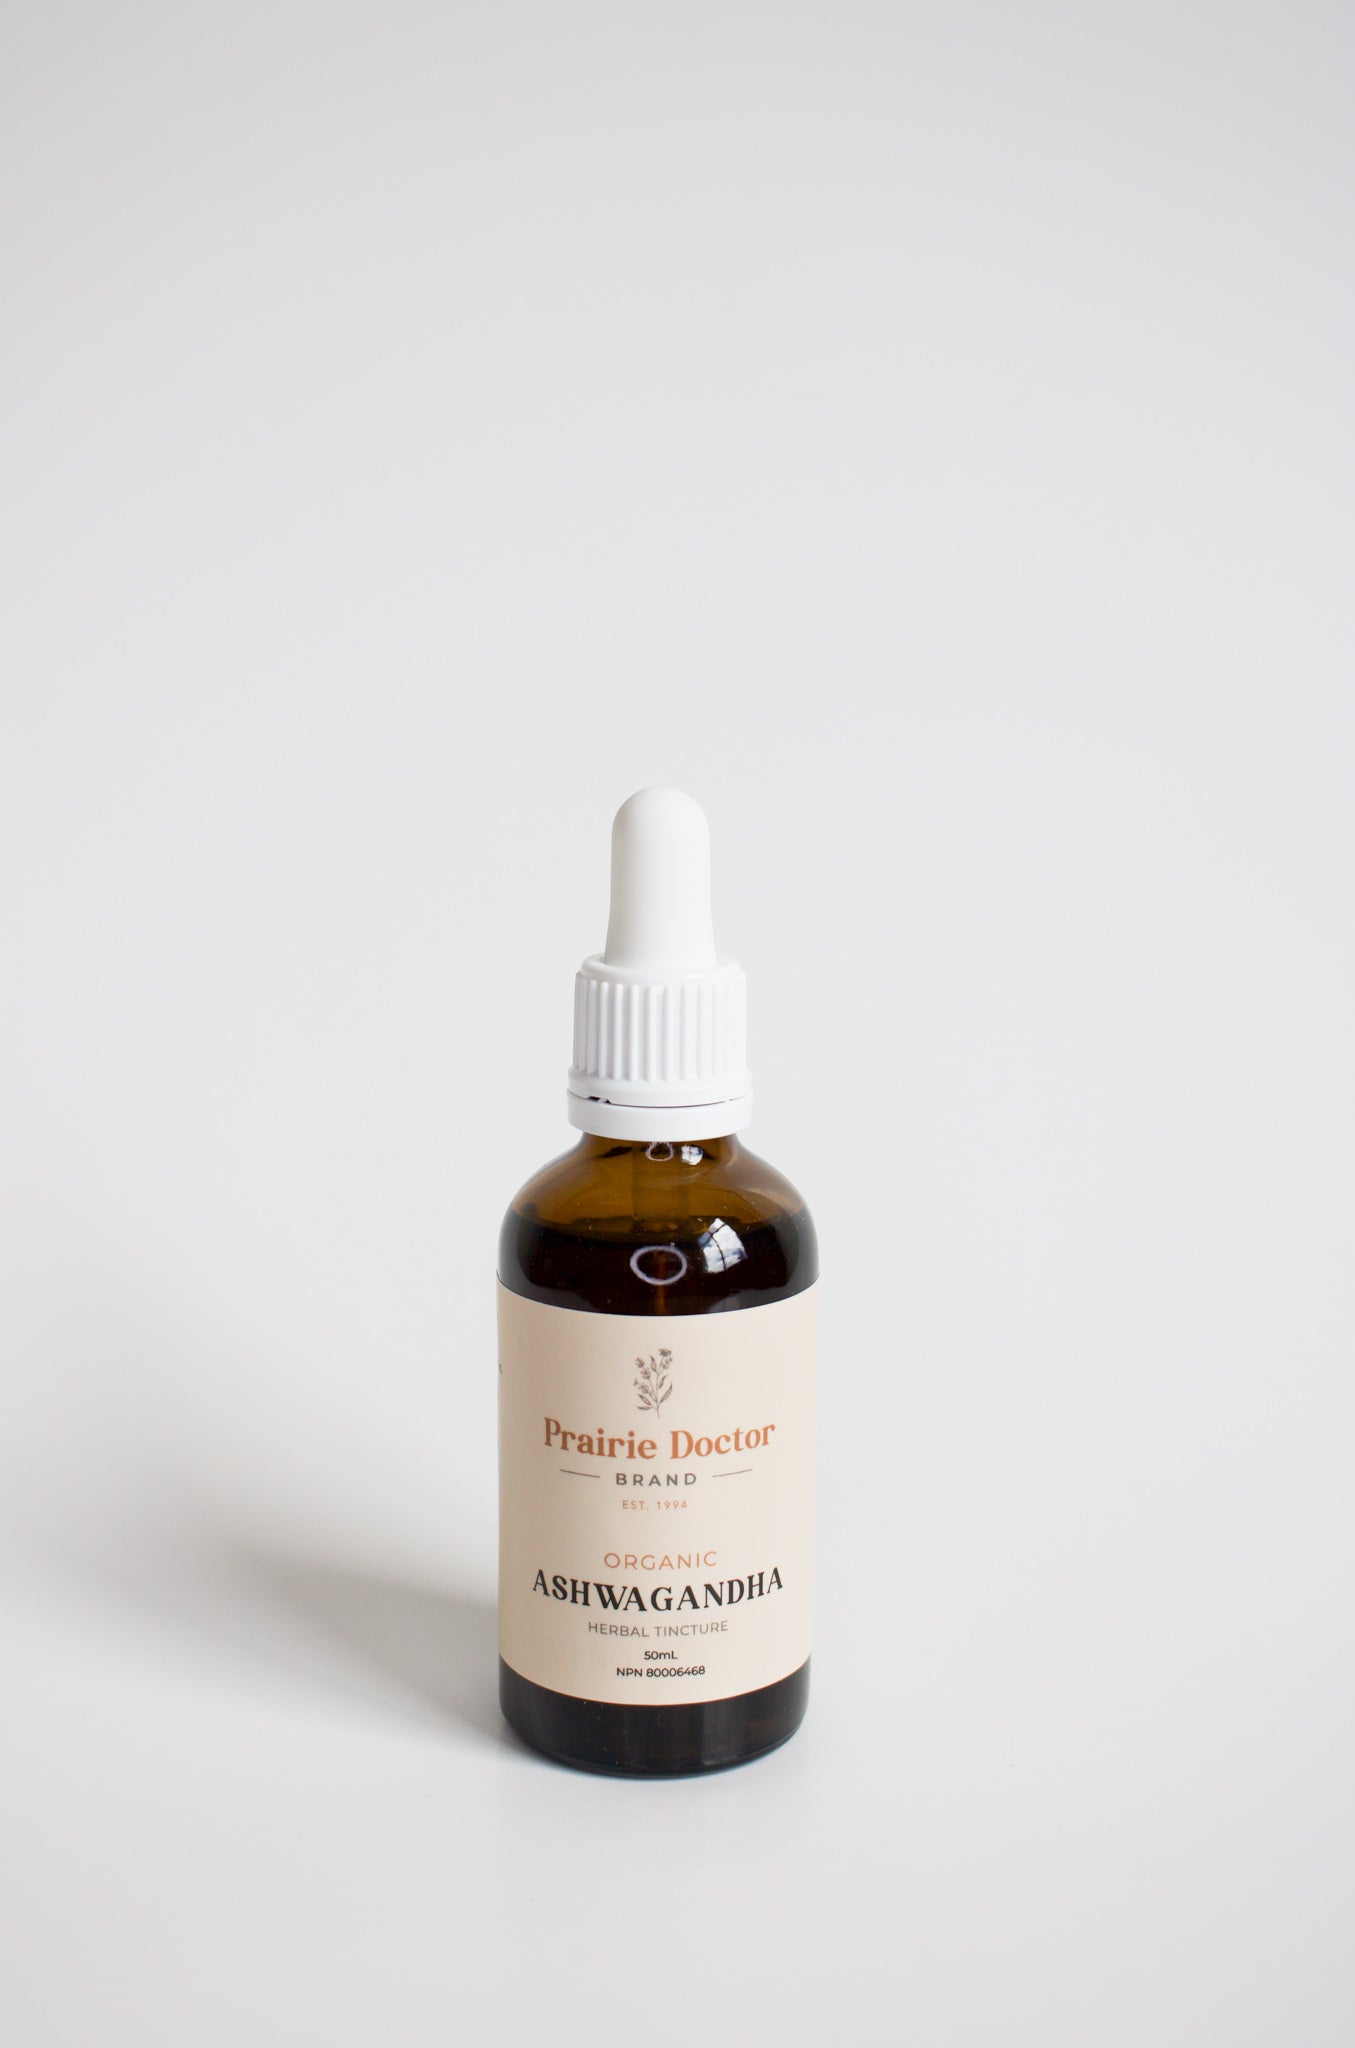 Our organic Ashwagandha herbal tincture is made using organic, sustainably sourced Ashwagandha root that is grown in Oregon. Ashwagandha is known for its powerful adaptogenic properties and has a long history of use in Ayurveda.